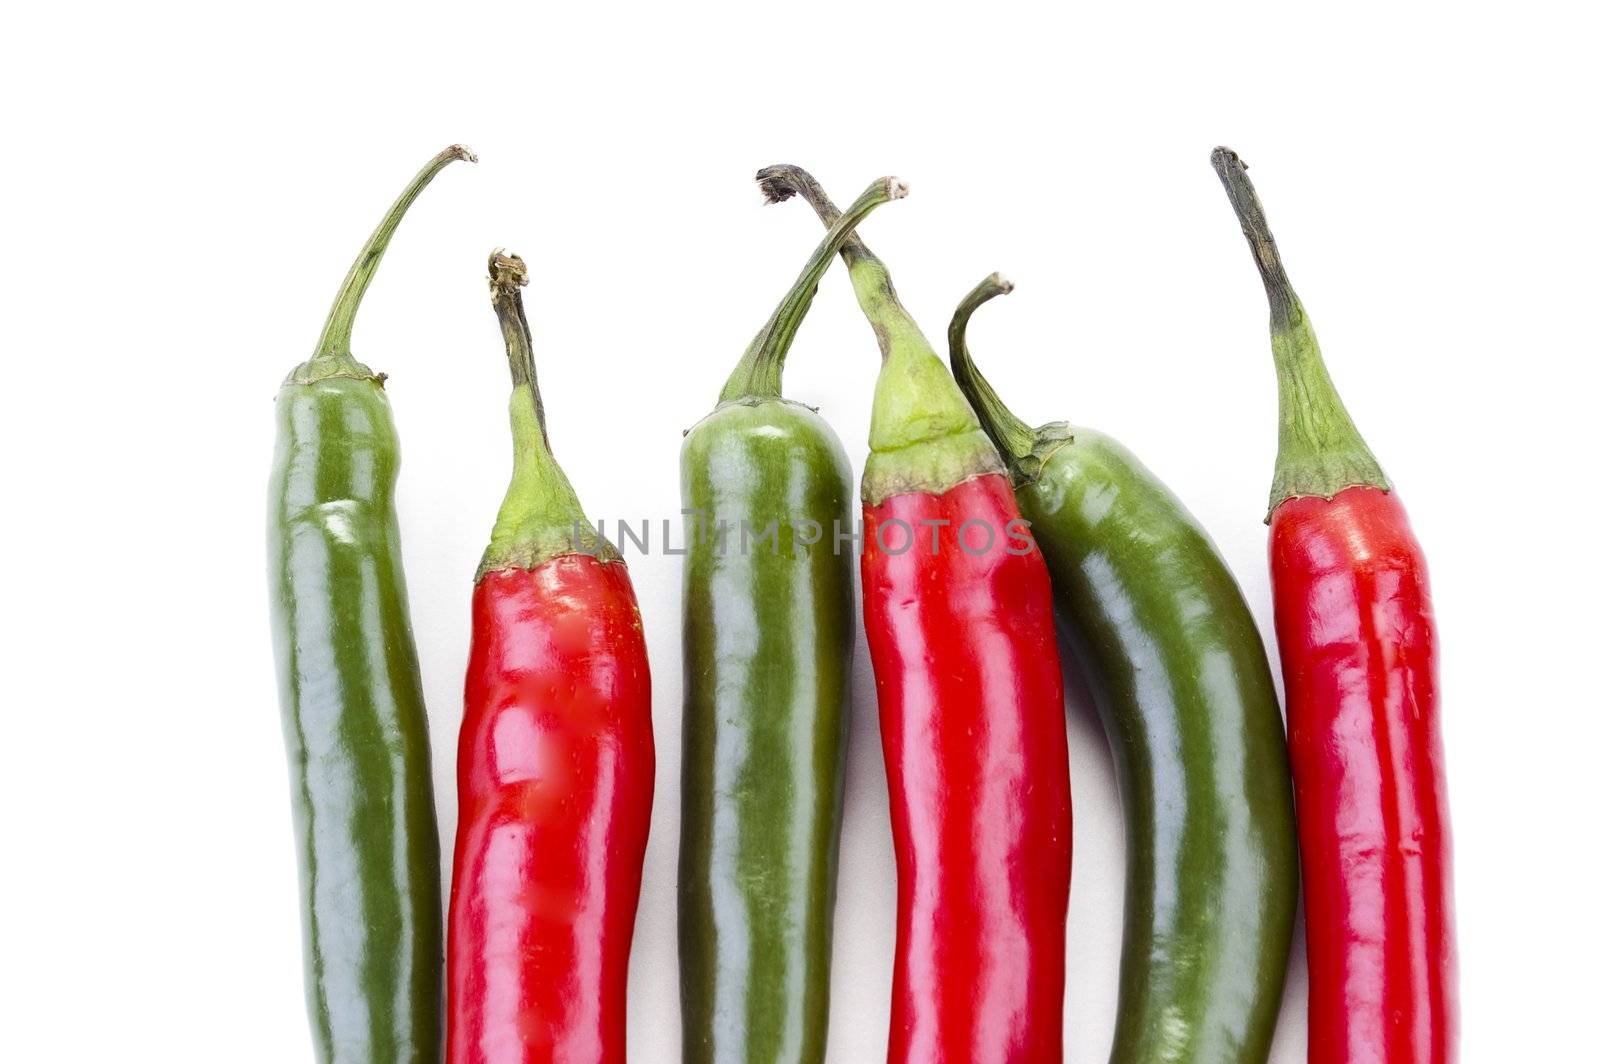 a series of green and red chili peppers by Triphka